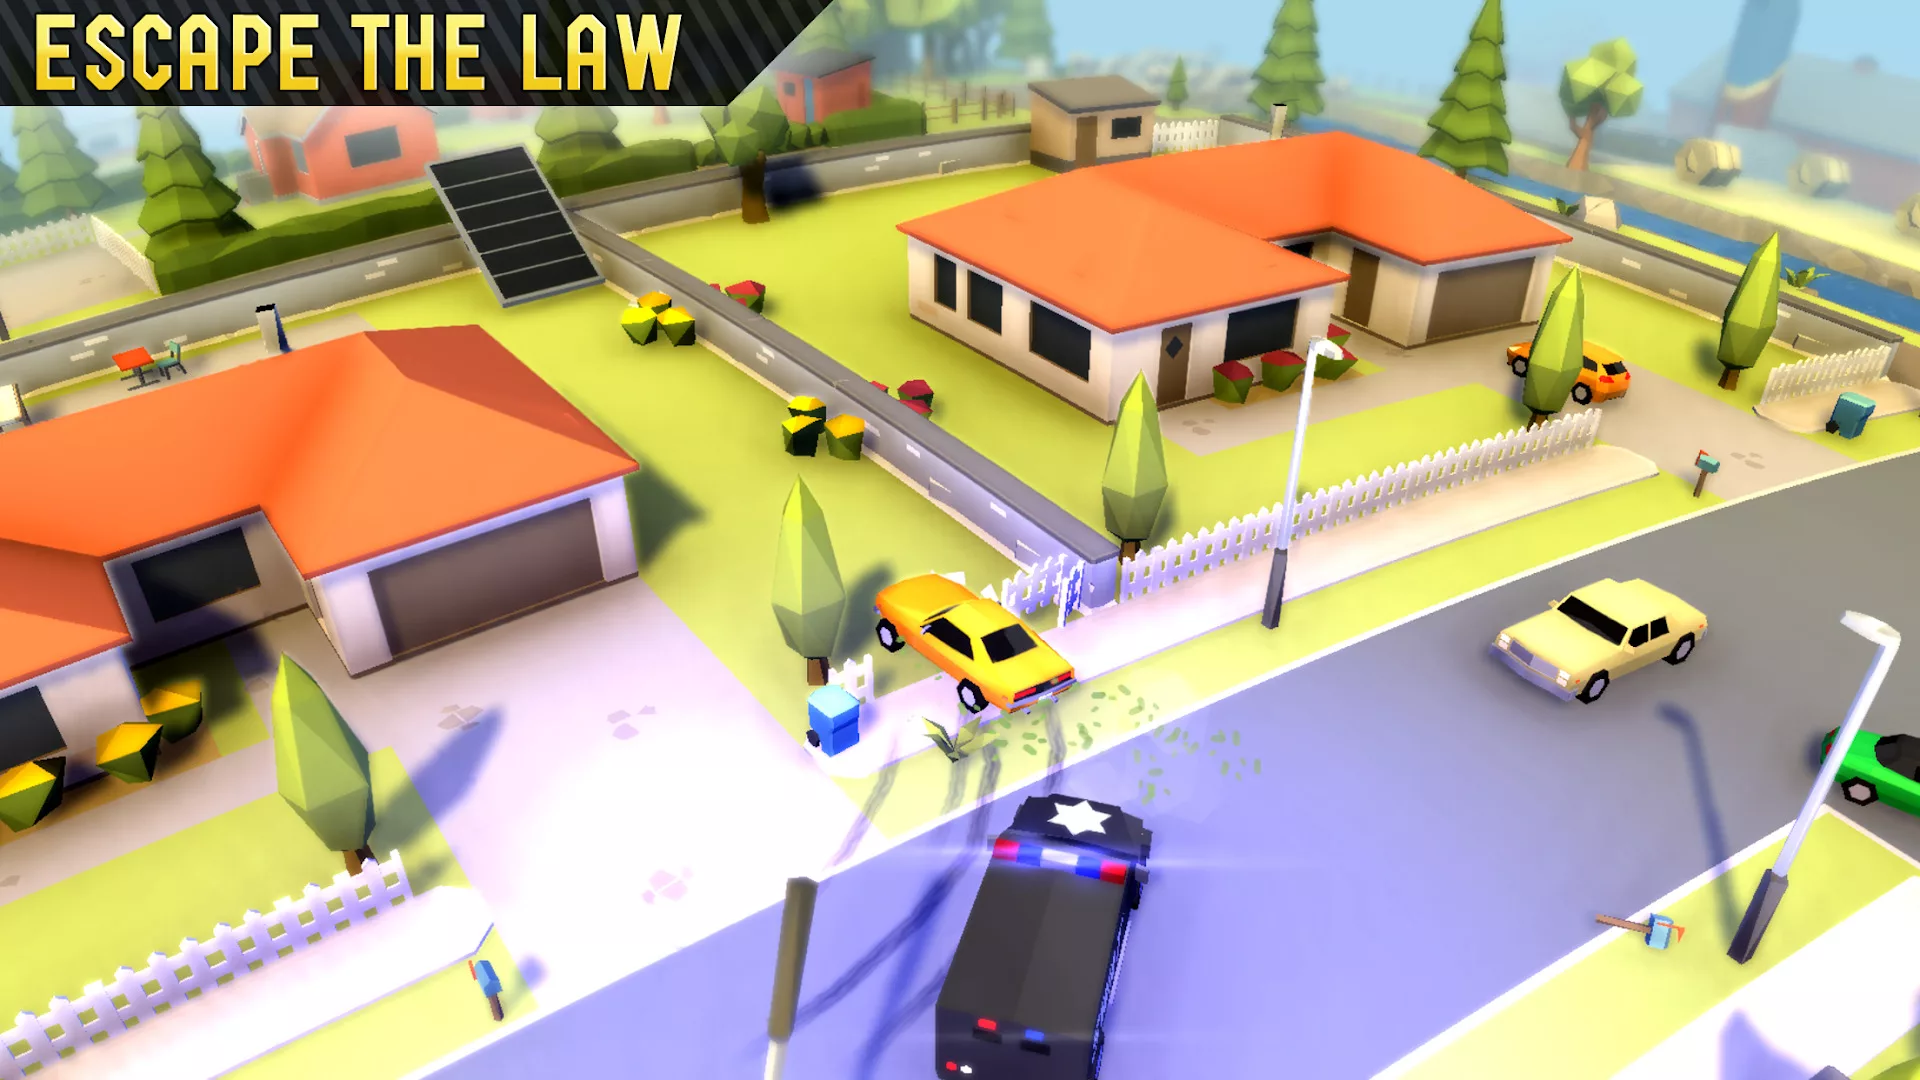 Reckless Getaway 2 Returns With Even More Explosive Automobile Action